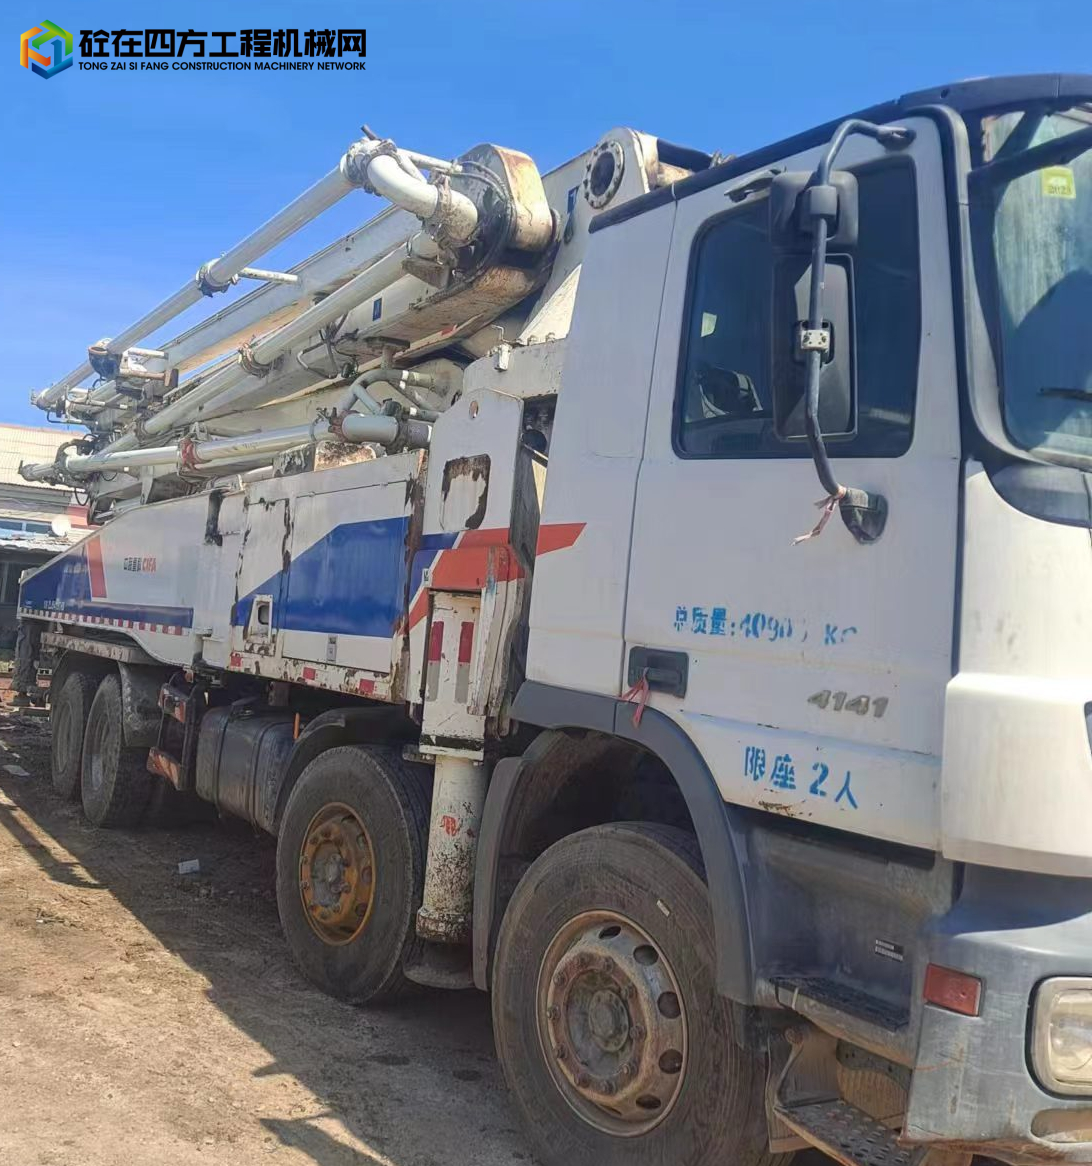 https://images.tongzsf.com/tong/truck_machine/20240508/1663aed3151f2b.jpg